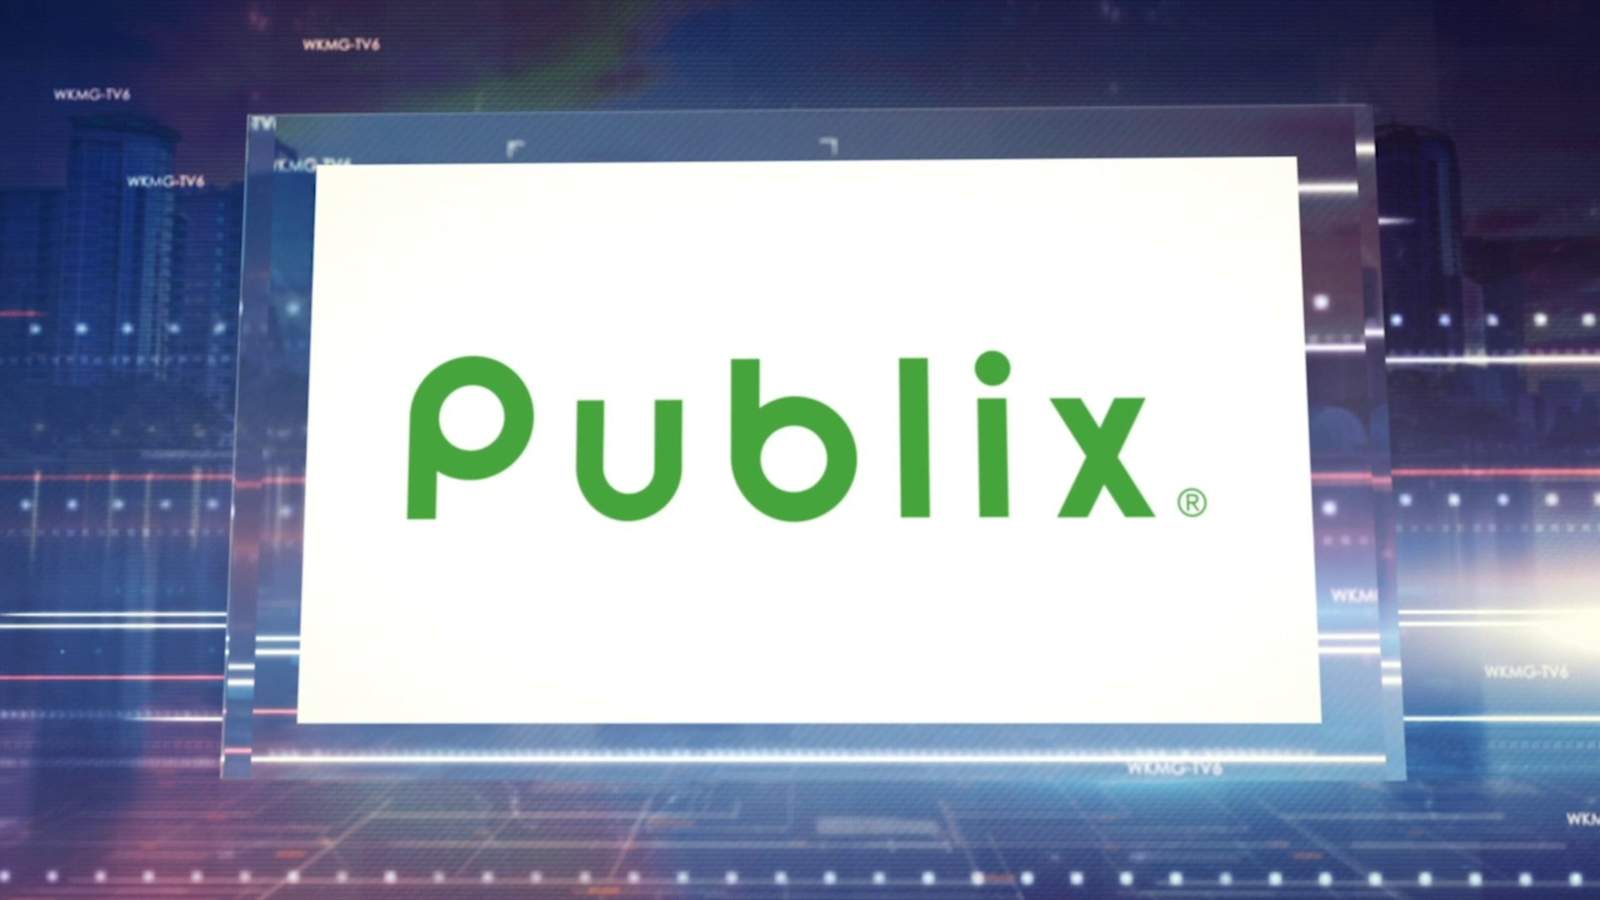 Publix is celebrating 2020 graduates with cake, banners and fun